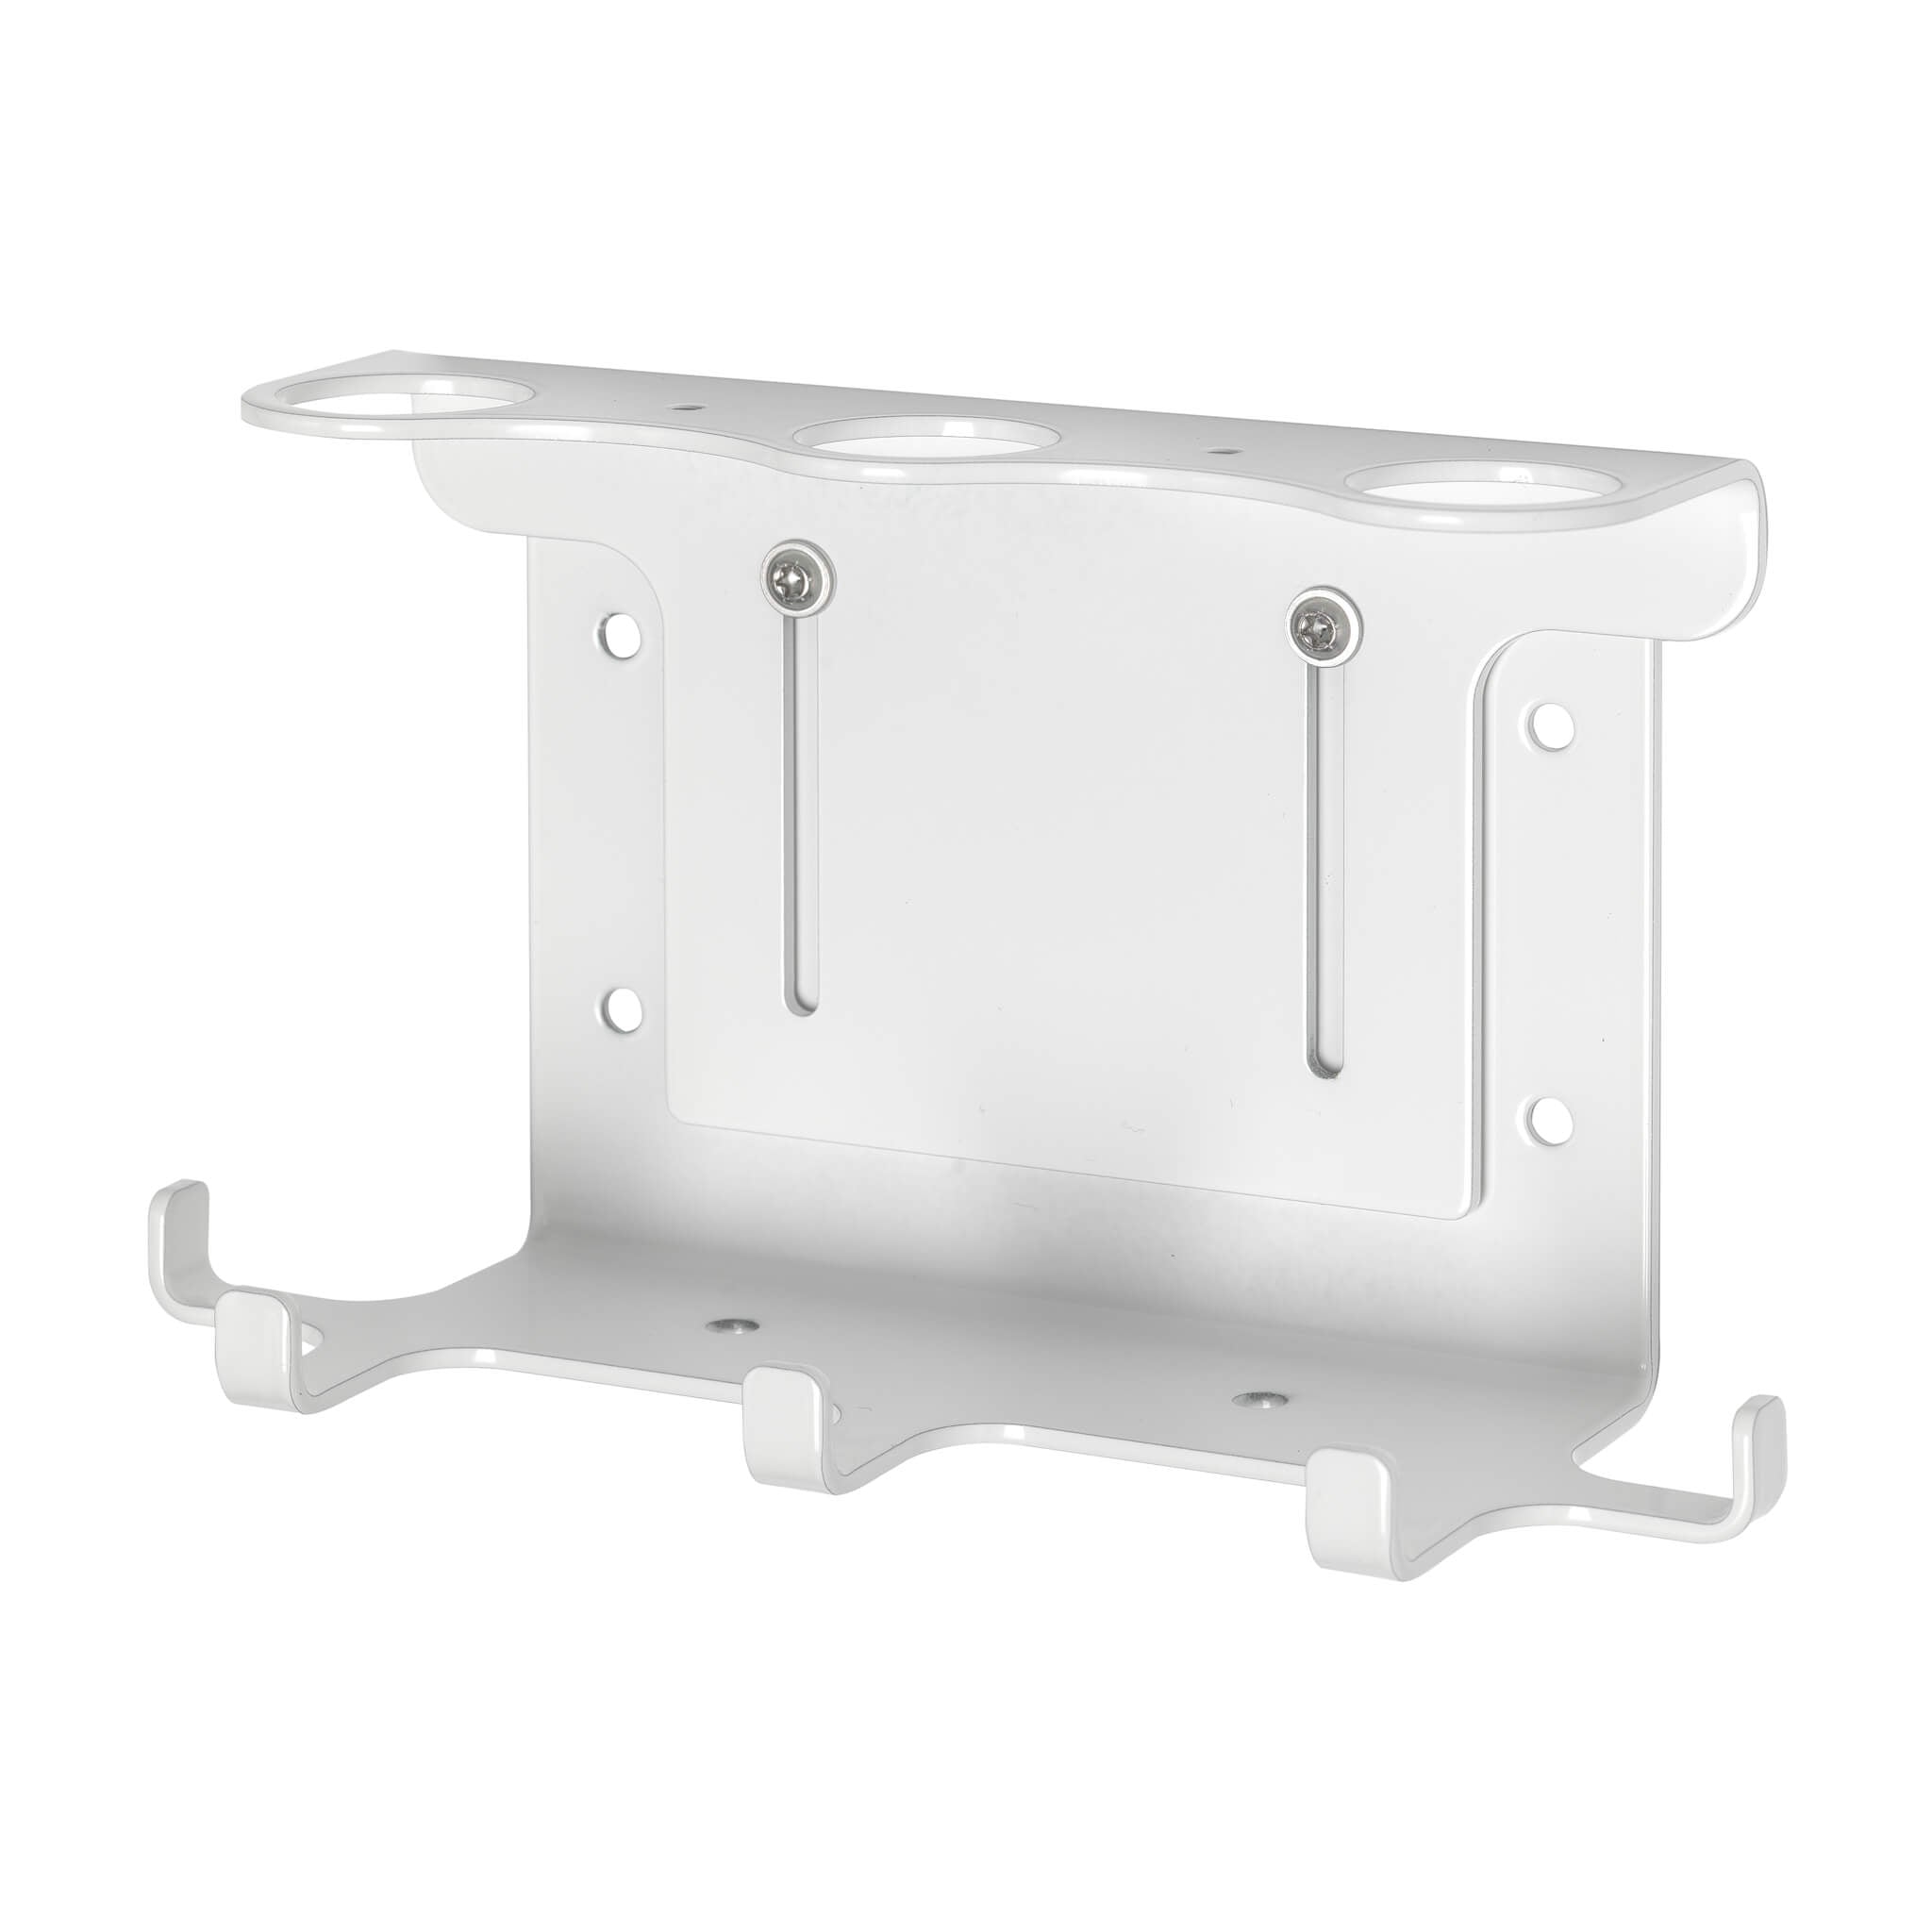 Triple 300ml Security Wall-Mounted Holder - Tyneham Luxury Products Canada